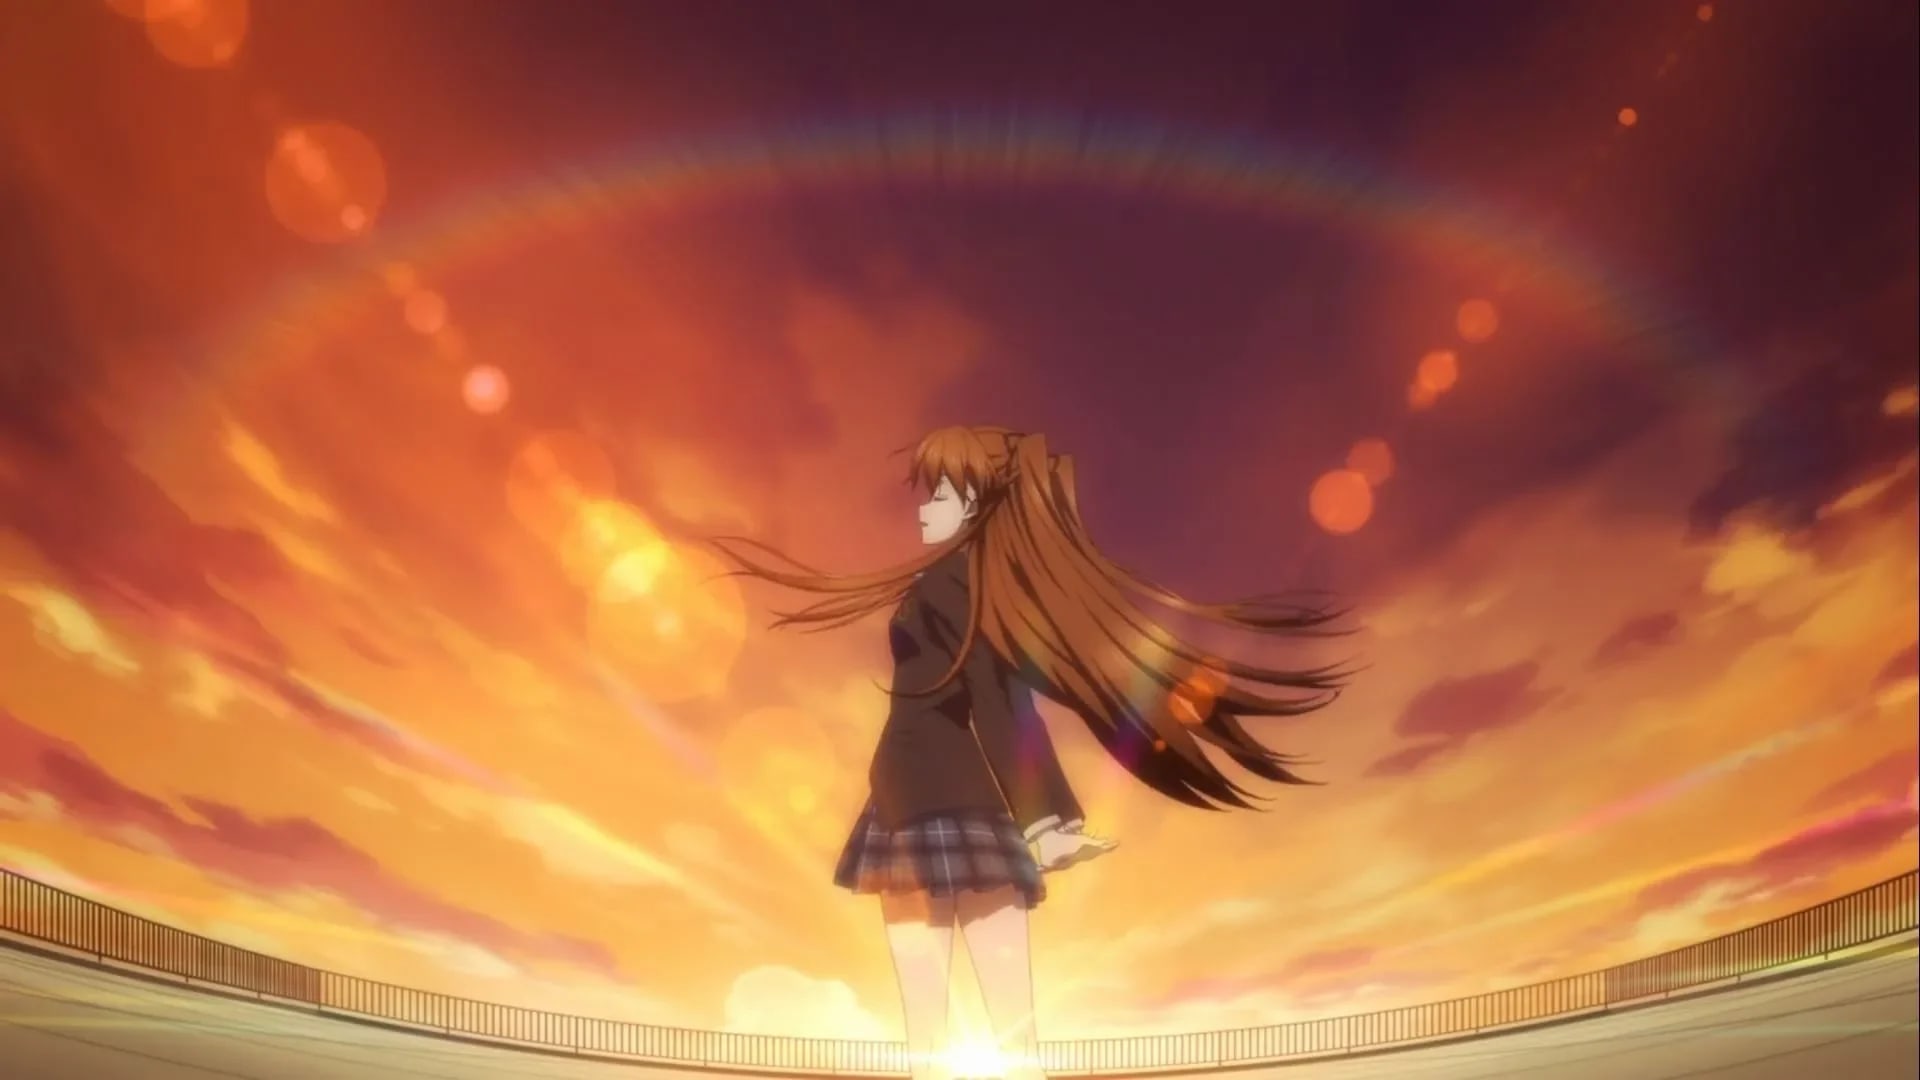 White Album 2 - Was There Really Any Other Way?